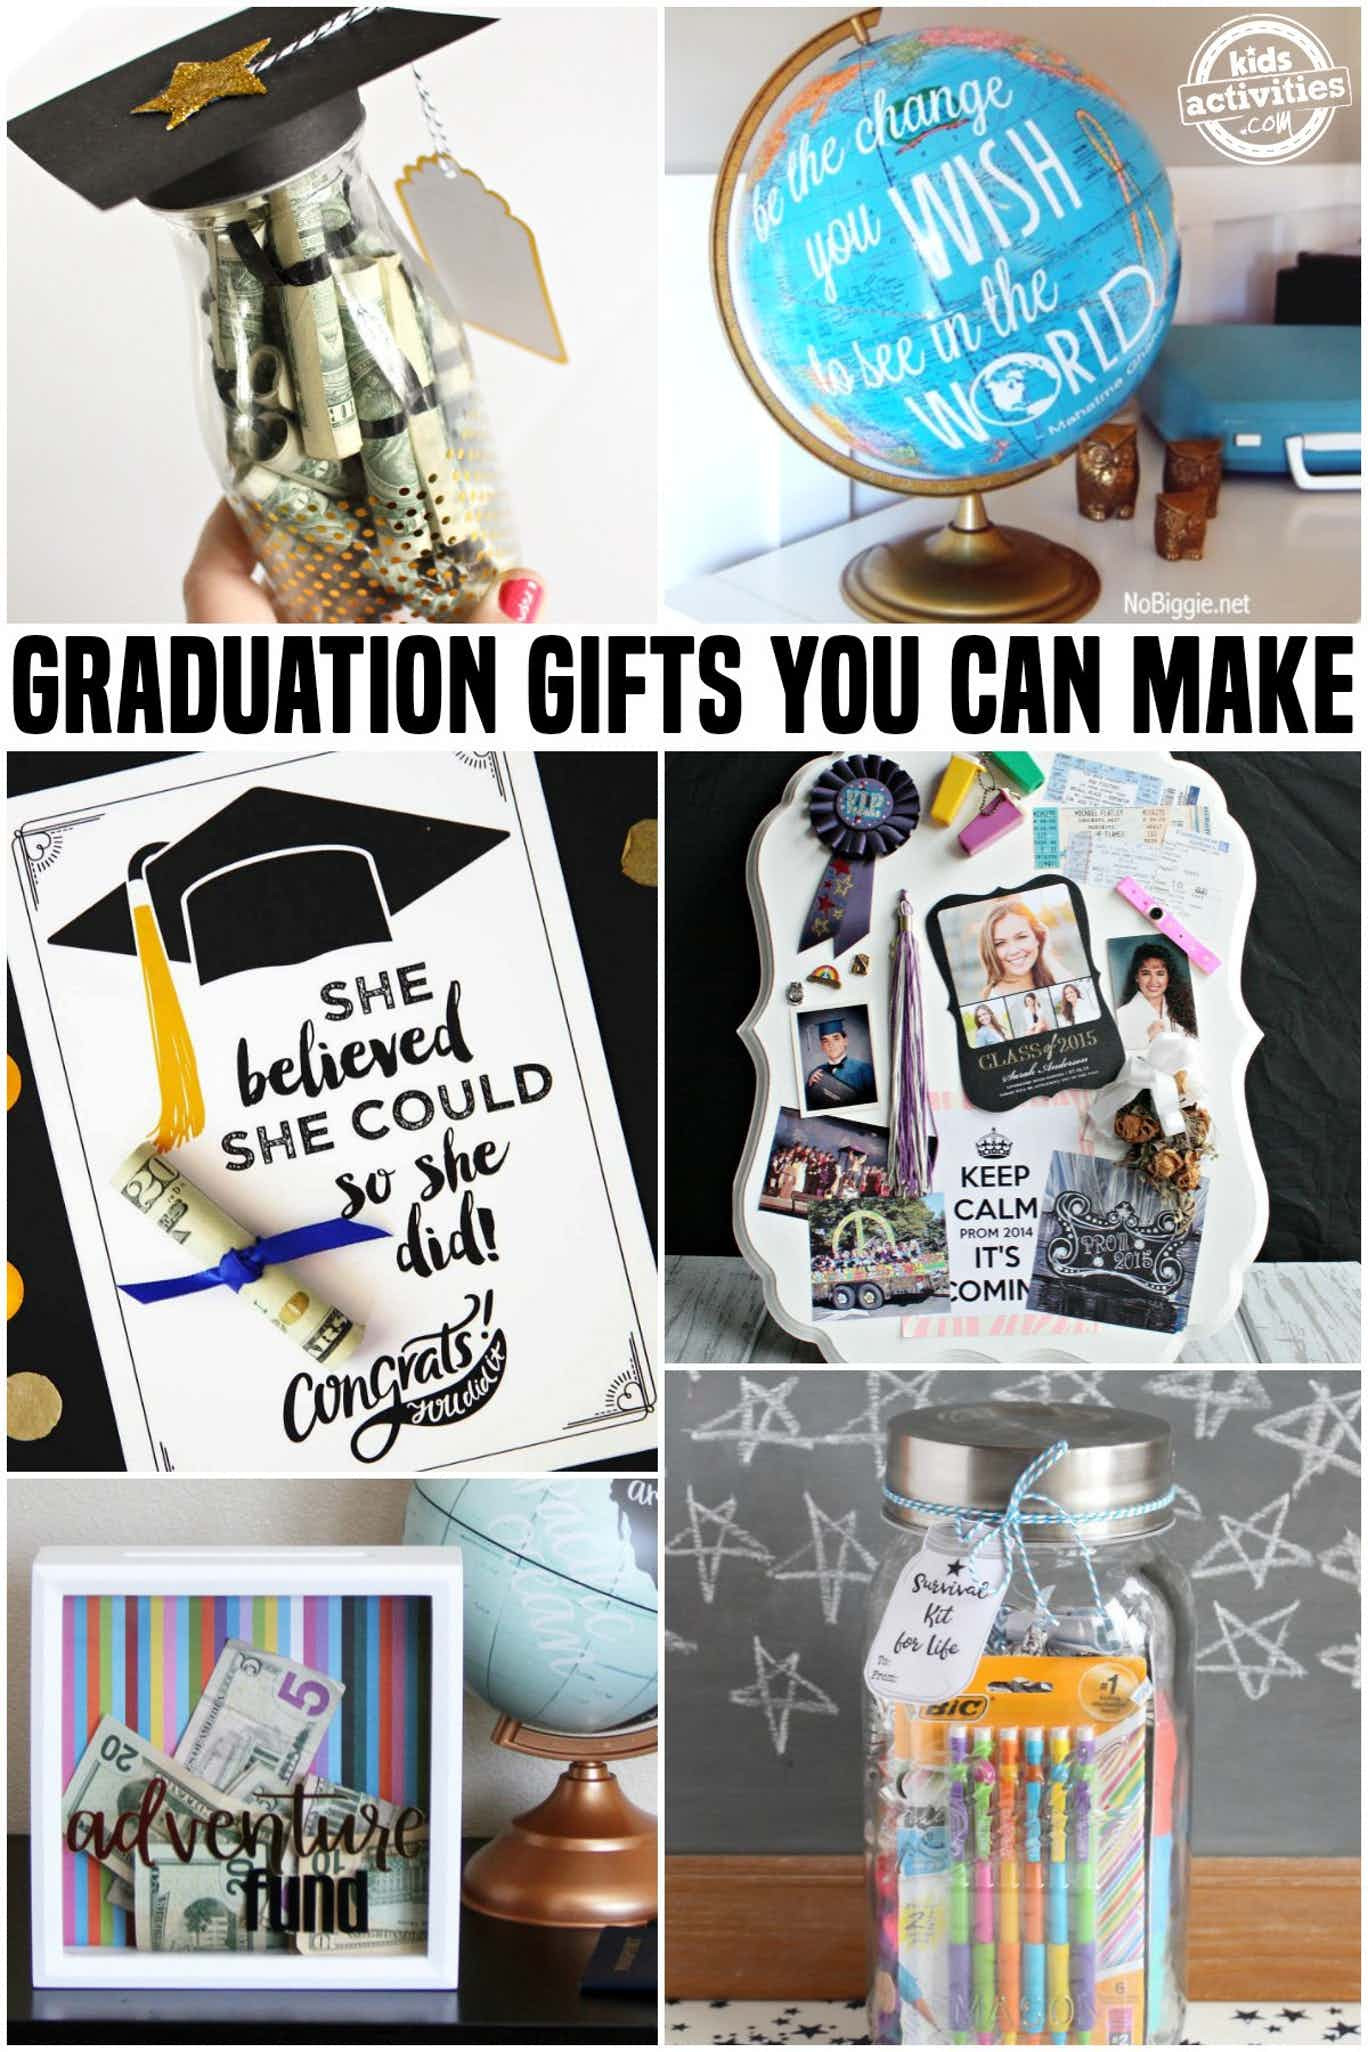 Pinterest Graduation Gift Ideas
 Awesome Graduation Gifts You Can Make At Home